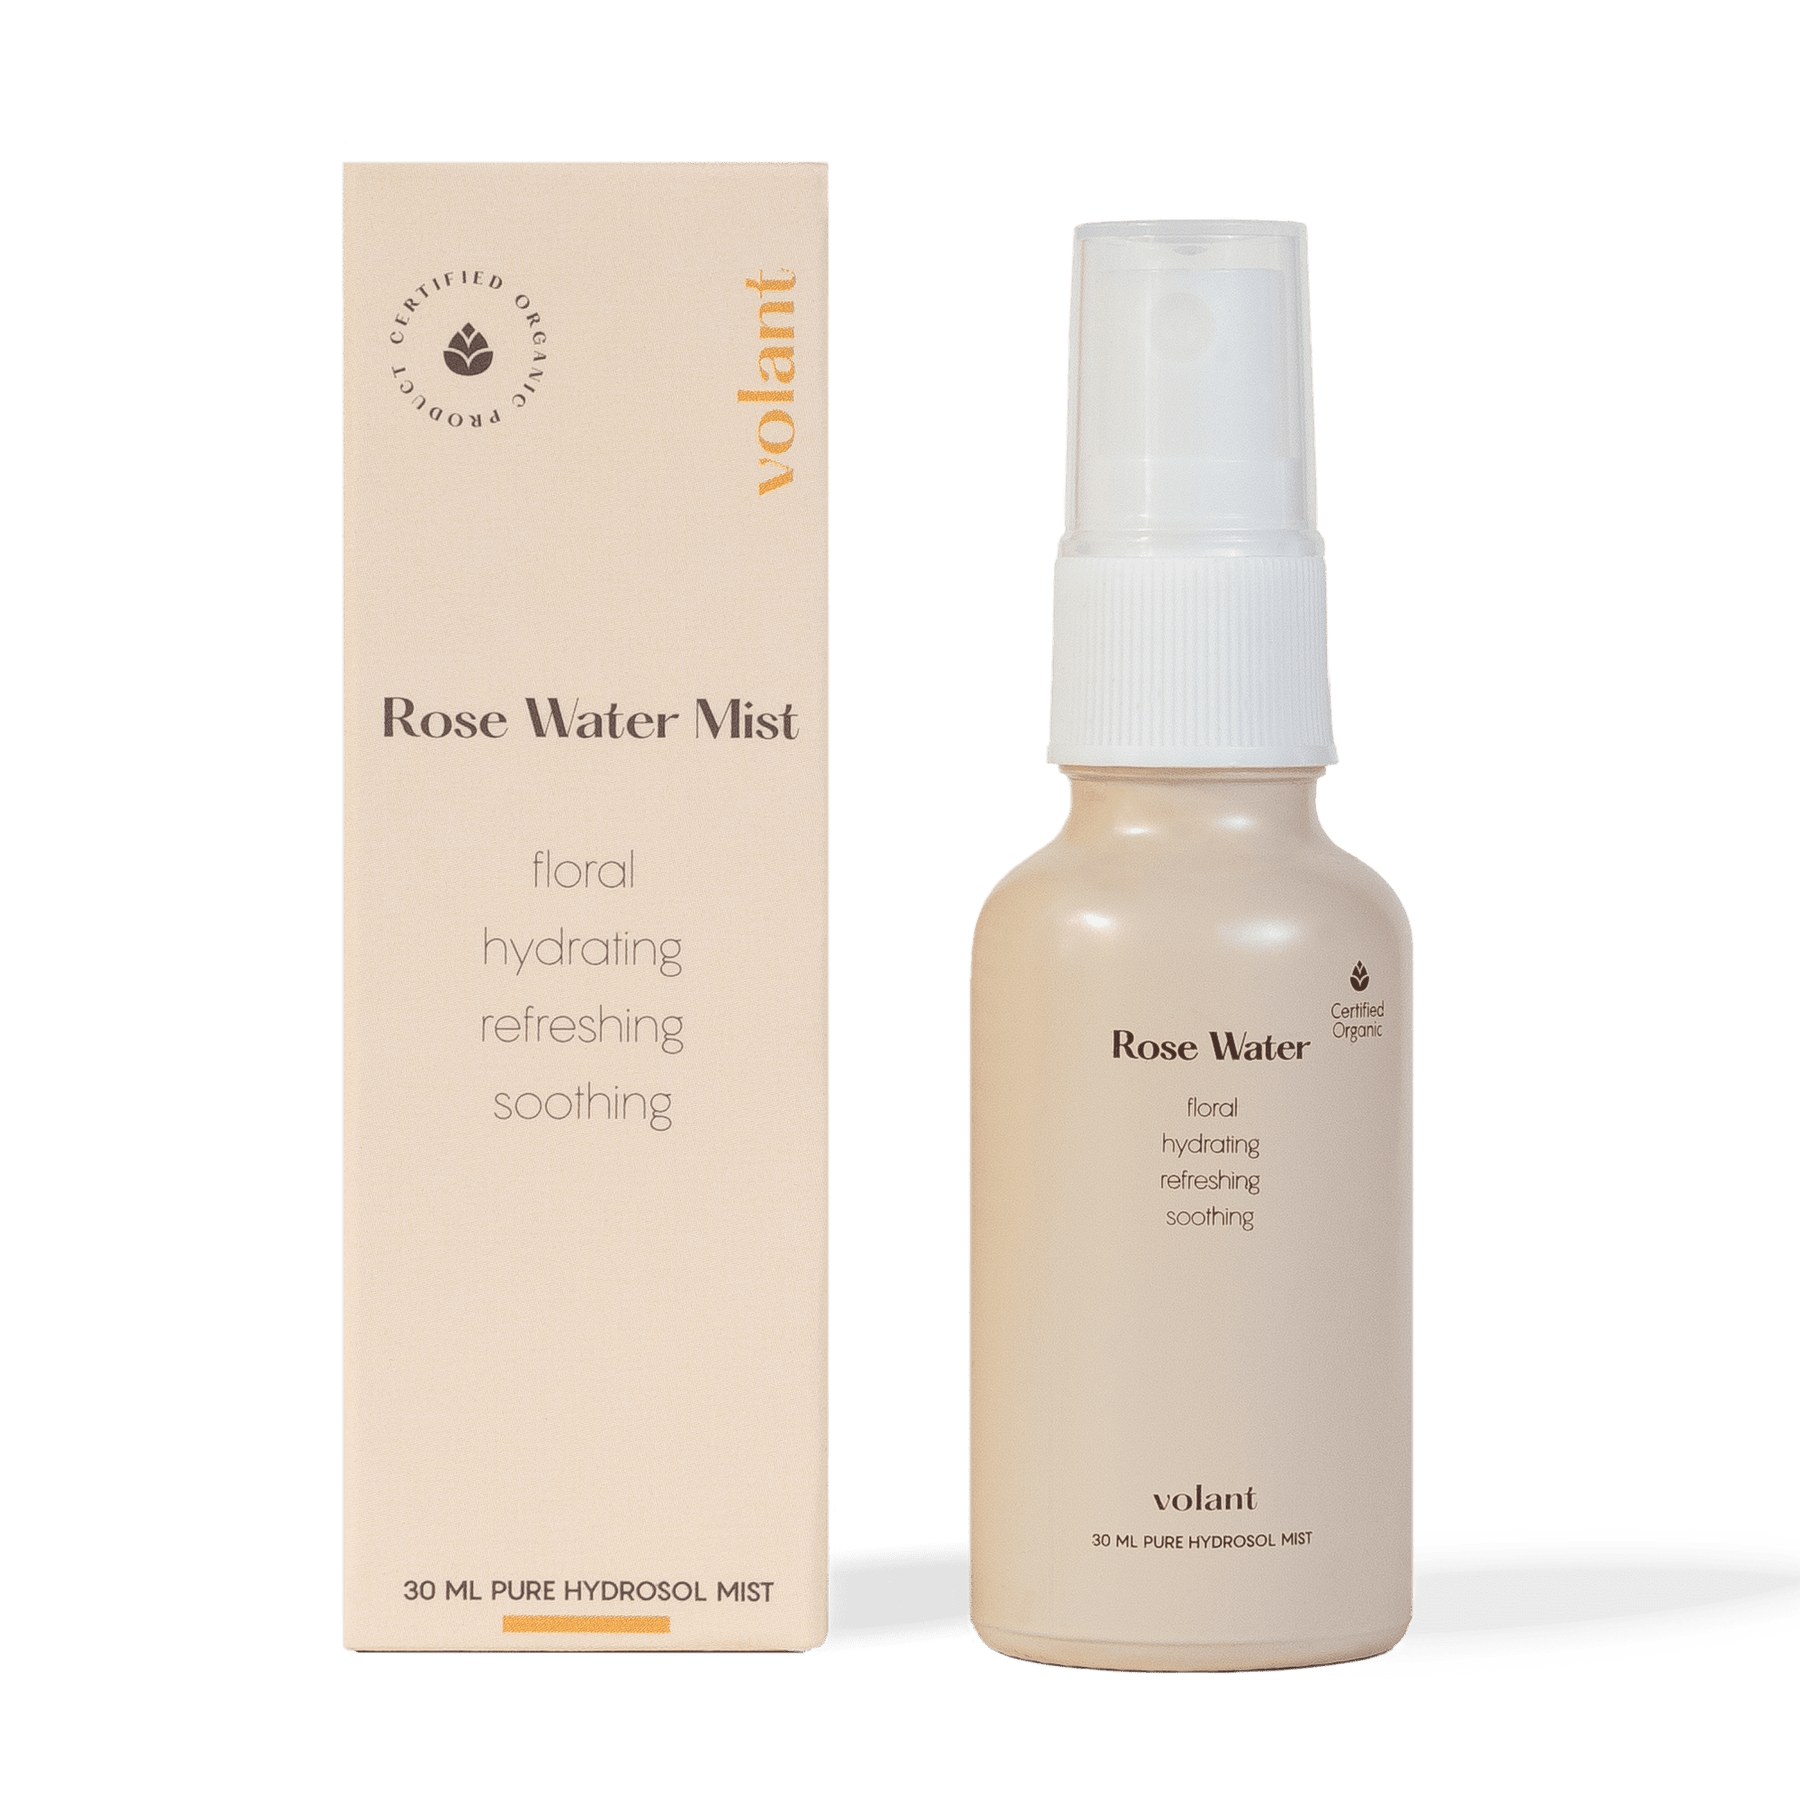 volant rose water mist bottle and packaging. It can be used as a facial toner, to soothe your skin or calm your emotions.